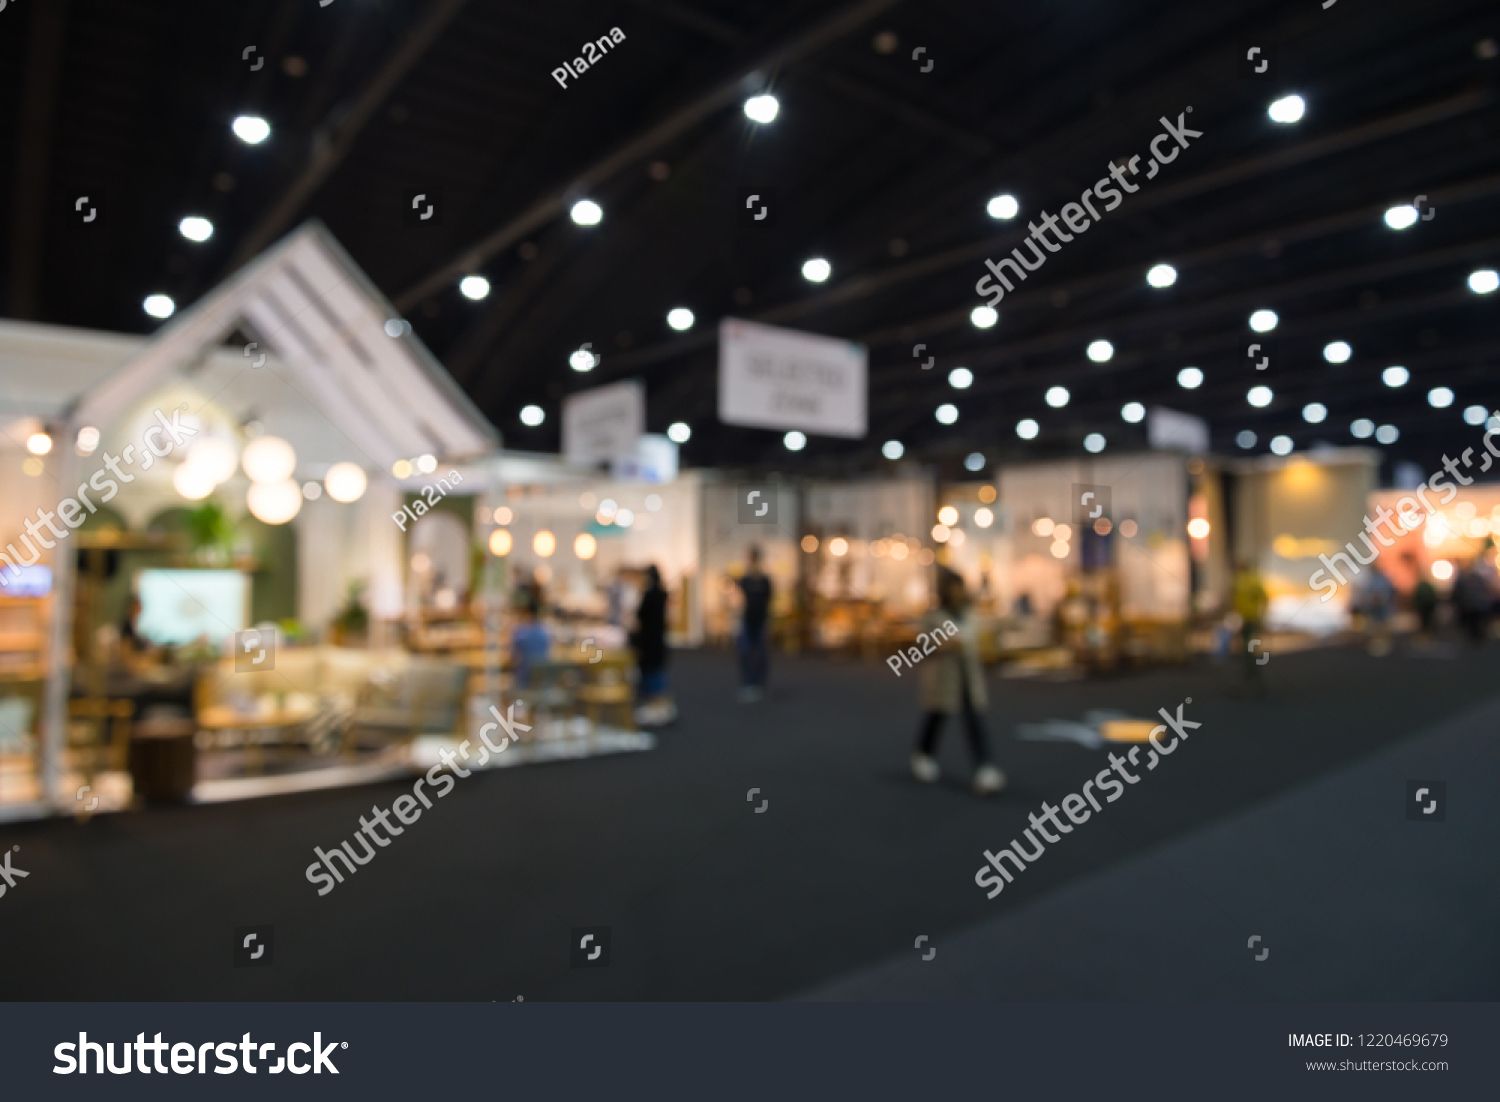 Abstract Defocused Blurred Of Public Trade Show Expo Event In